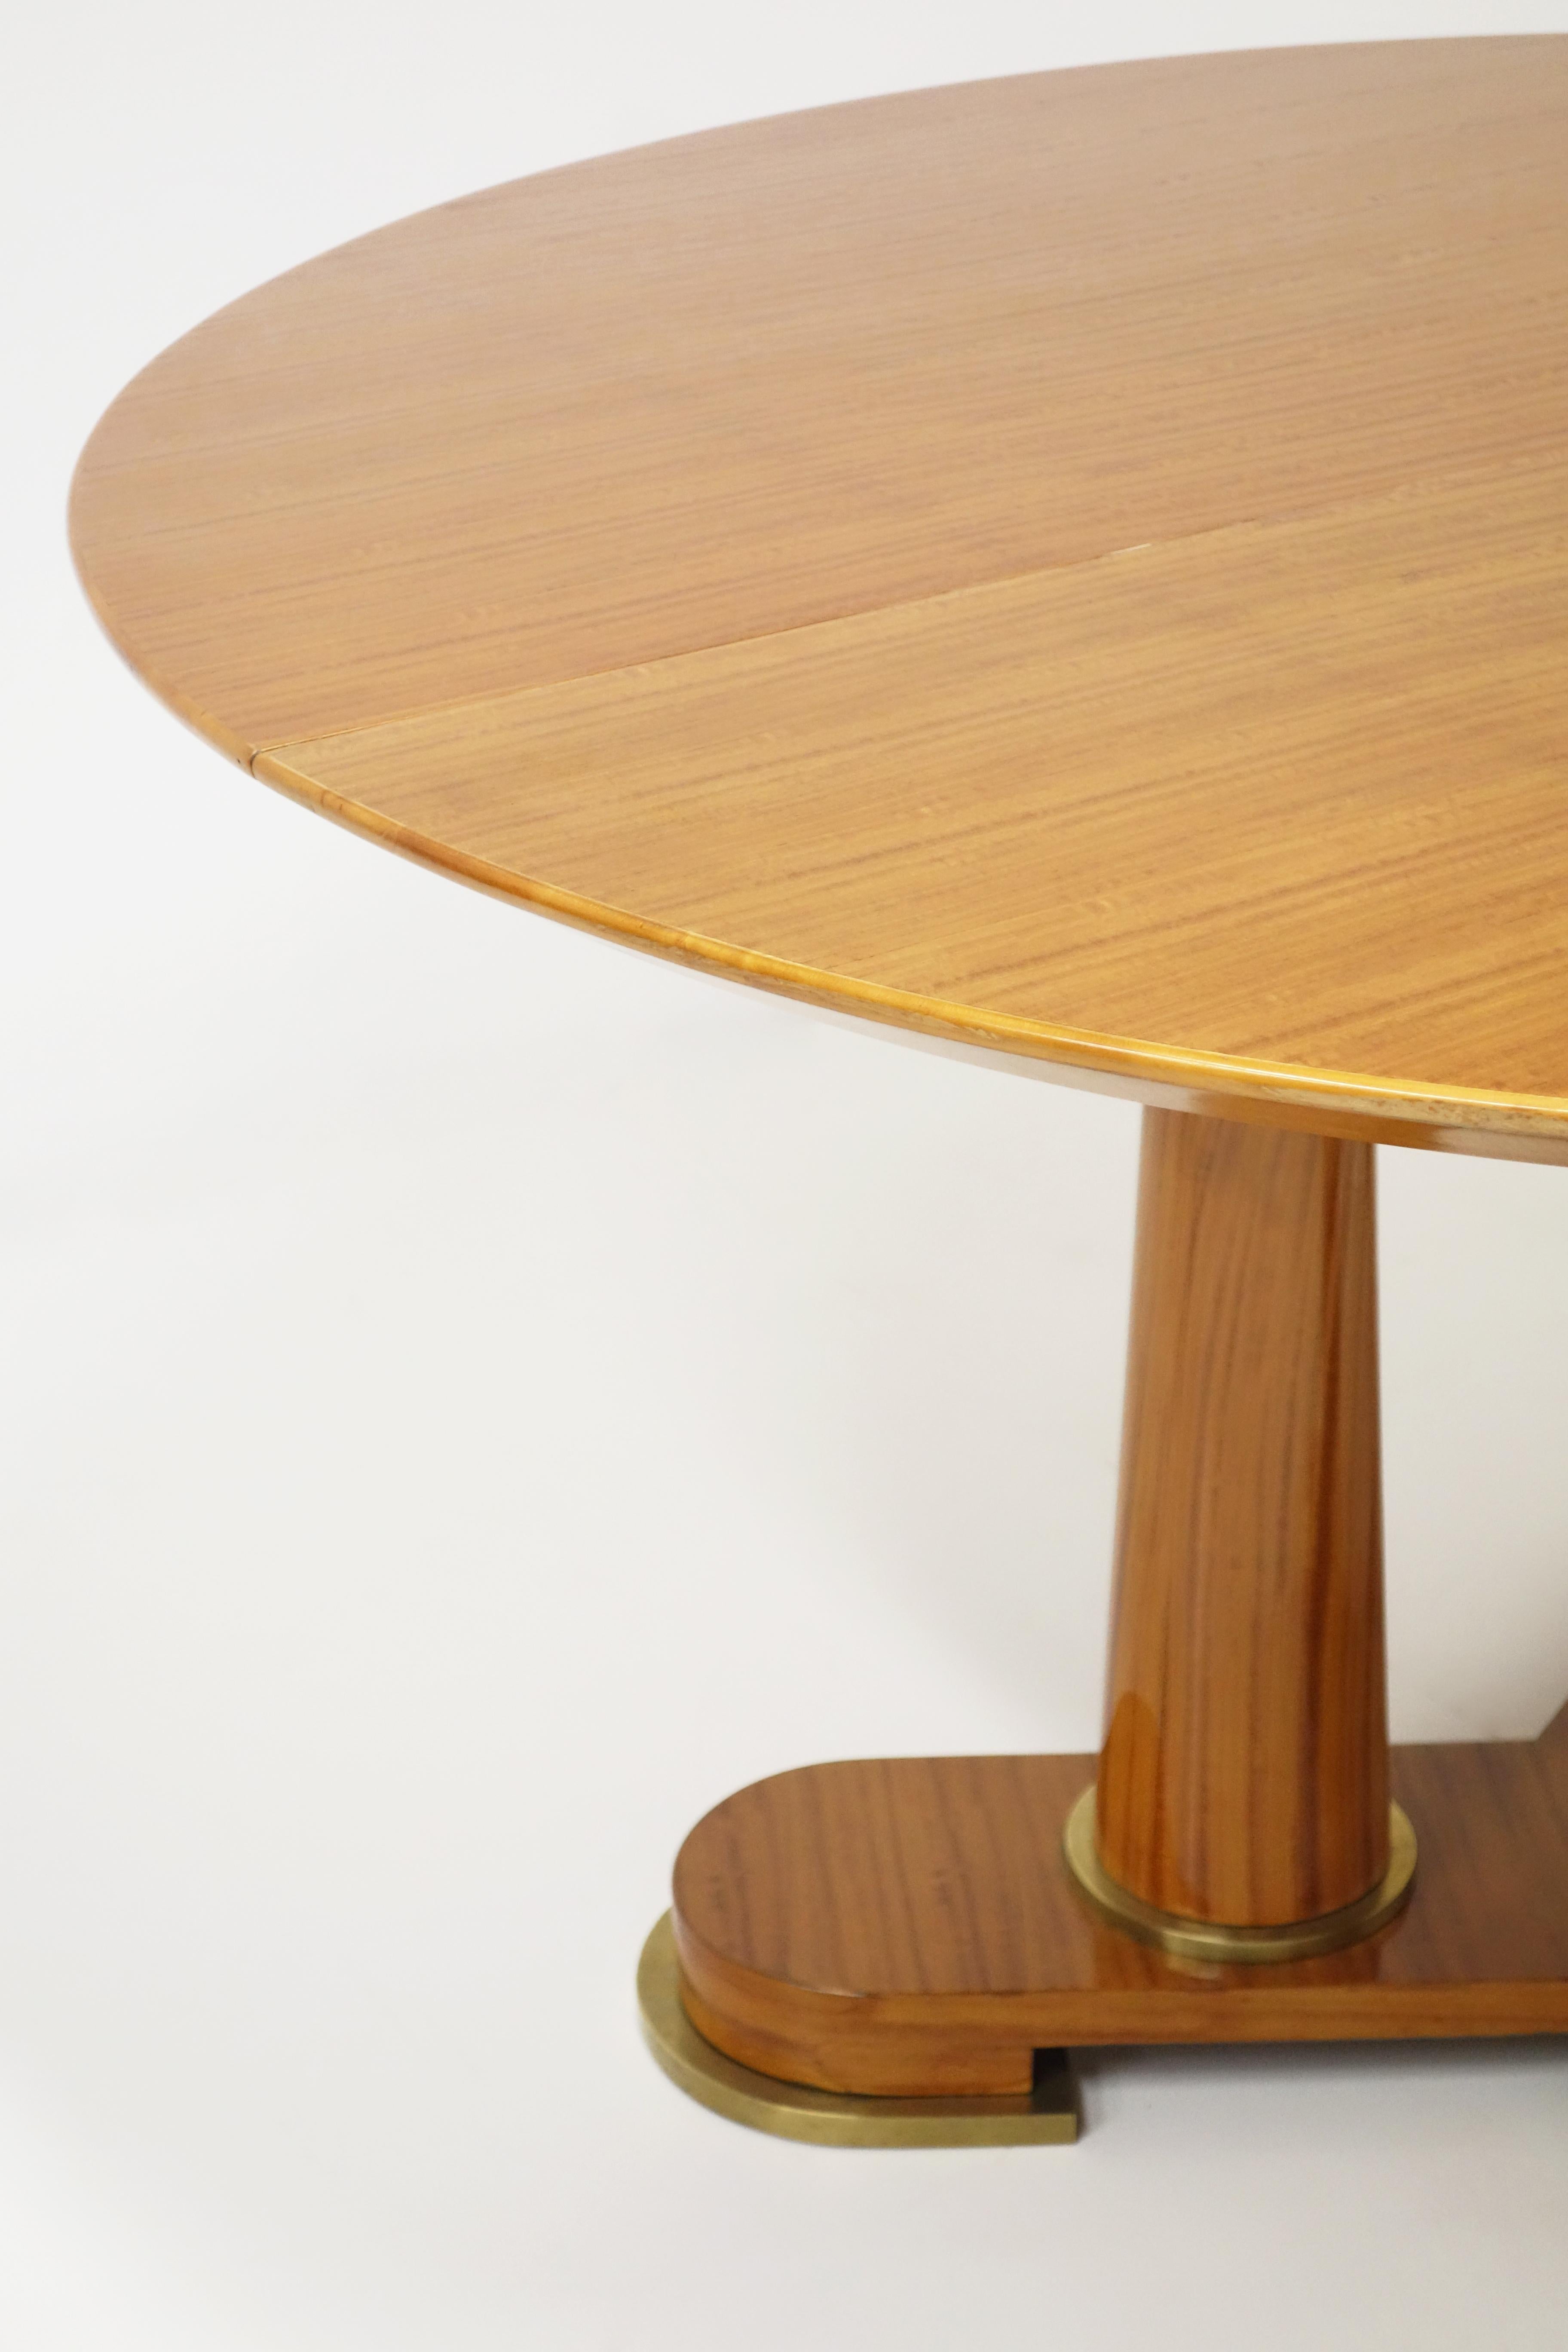 Patinated Varnished Lemon-Tree Circular Table by Jean Royère, circa 1950 For Sale